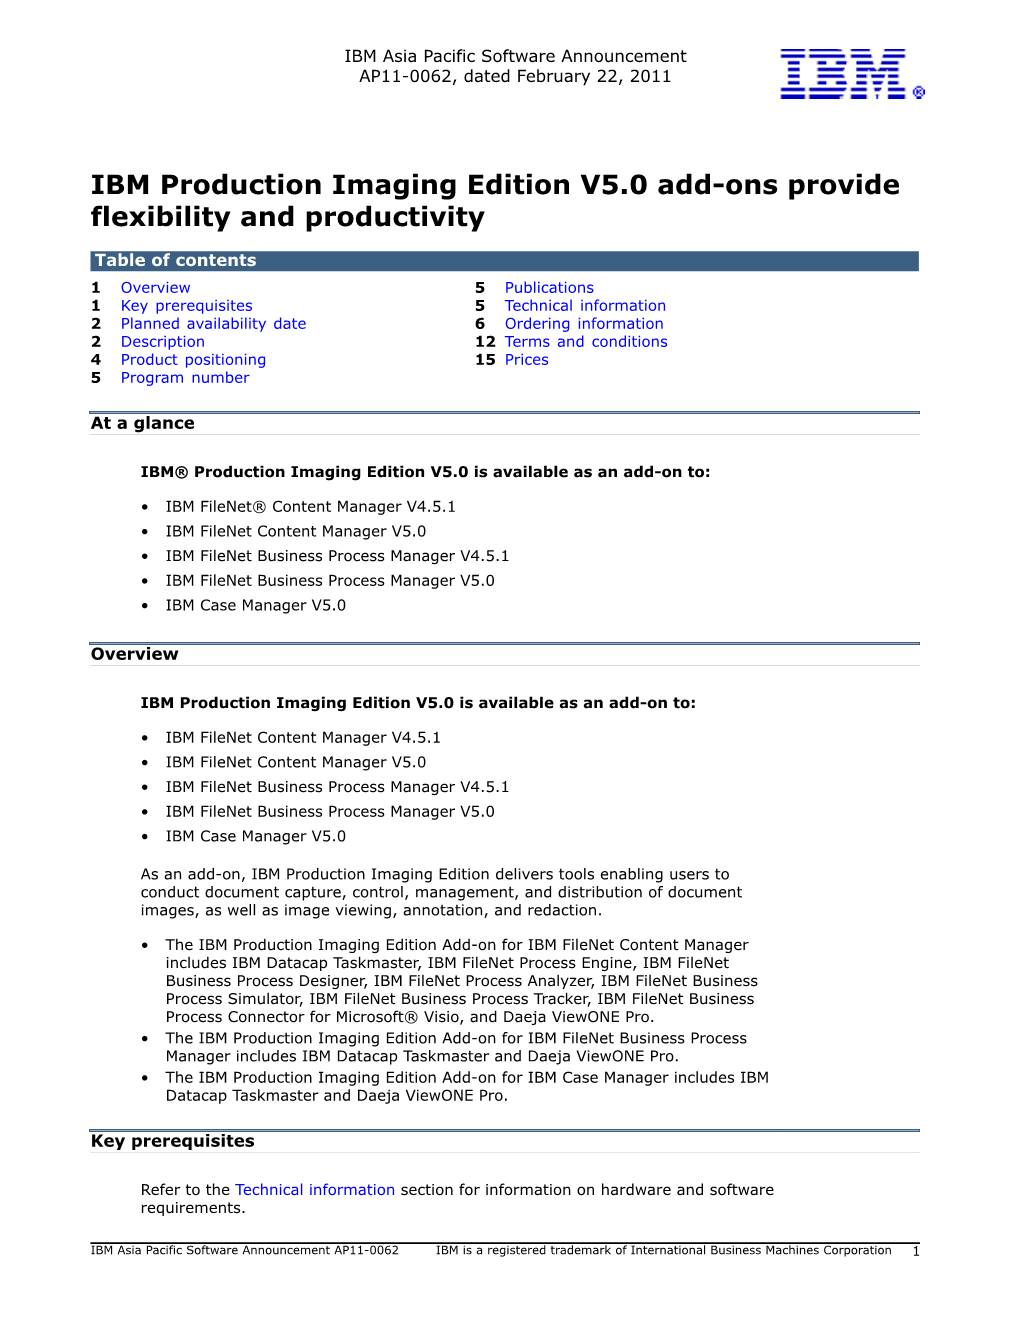 IBM Production Imaging Edition V5.0 Add-Ons Provide Flexibility and Productivity